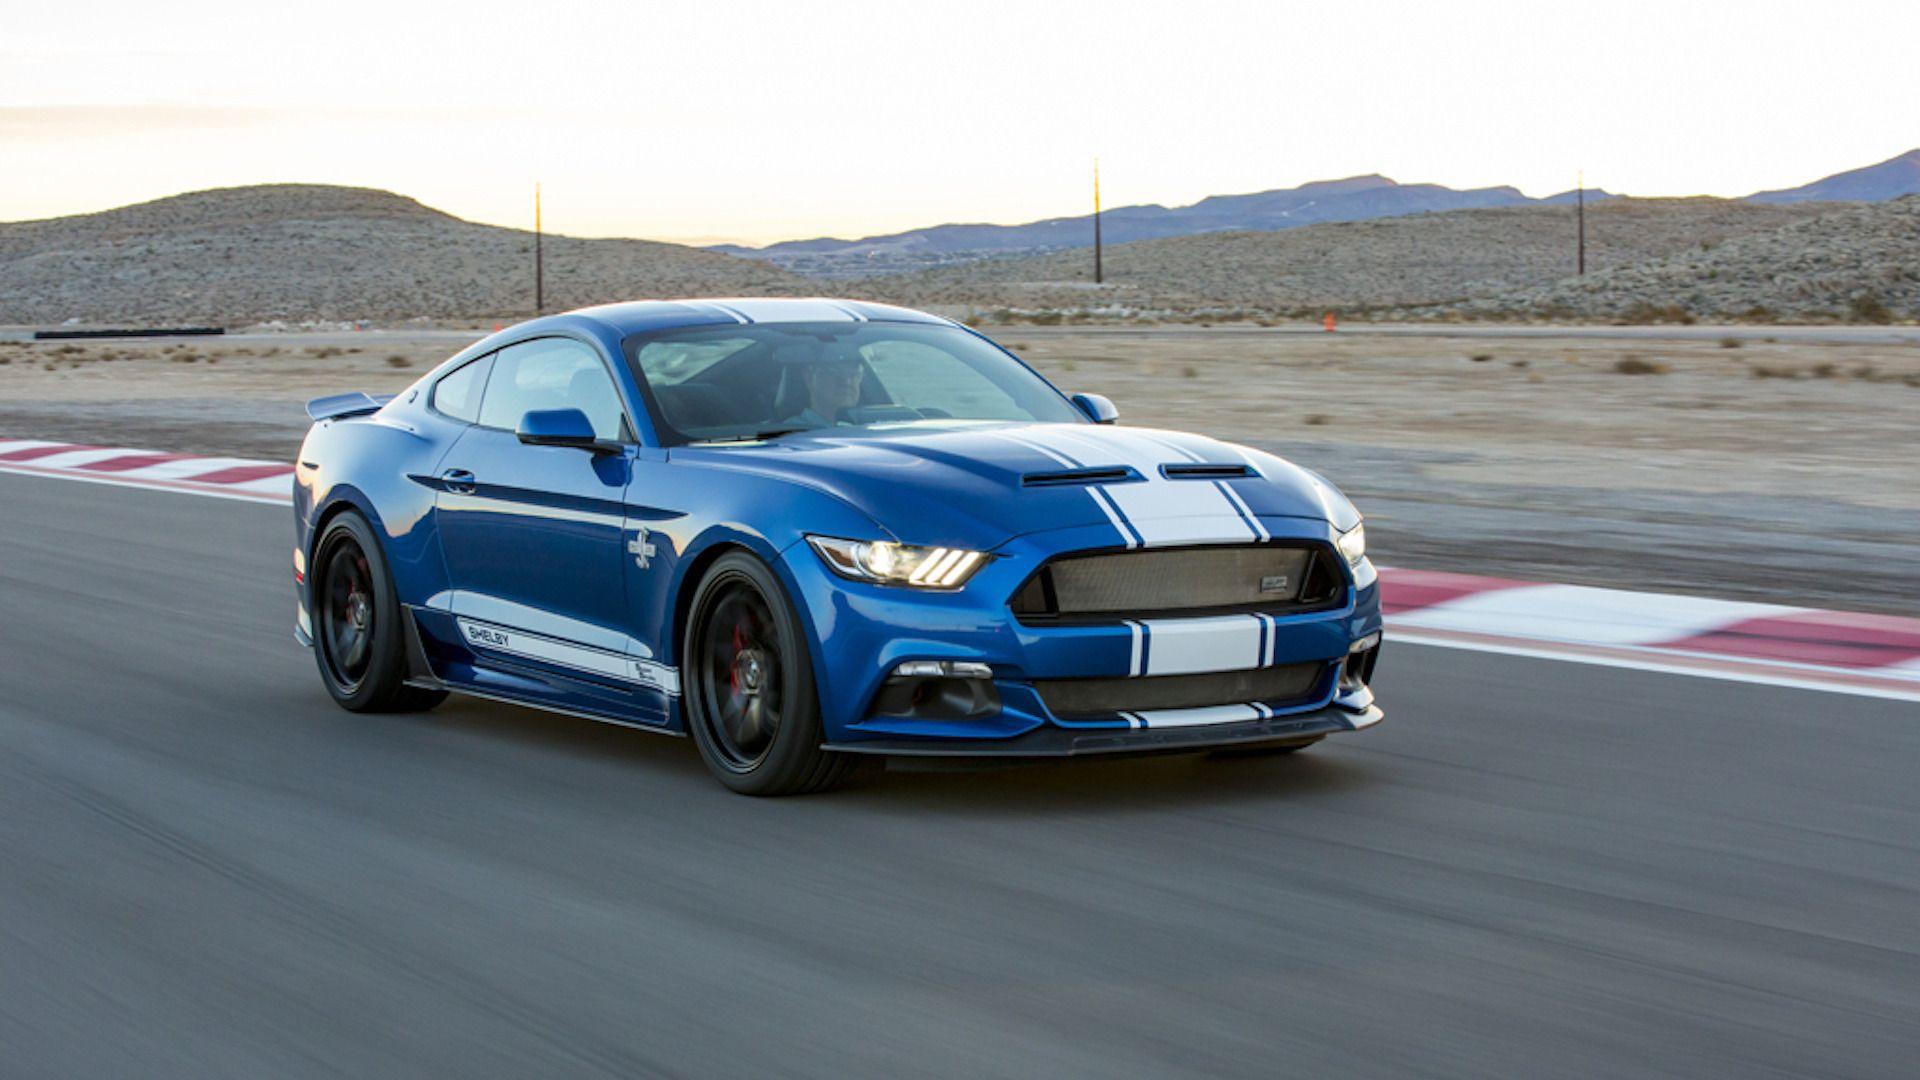 Ford Mustang 50th Anniversary Logo - 2017 Shelby Super Snake 50th Anniversary Edition | Top Speed